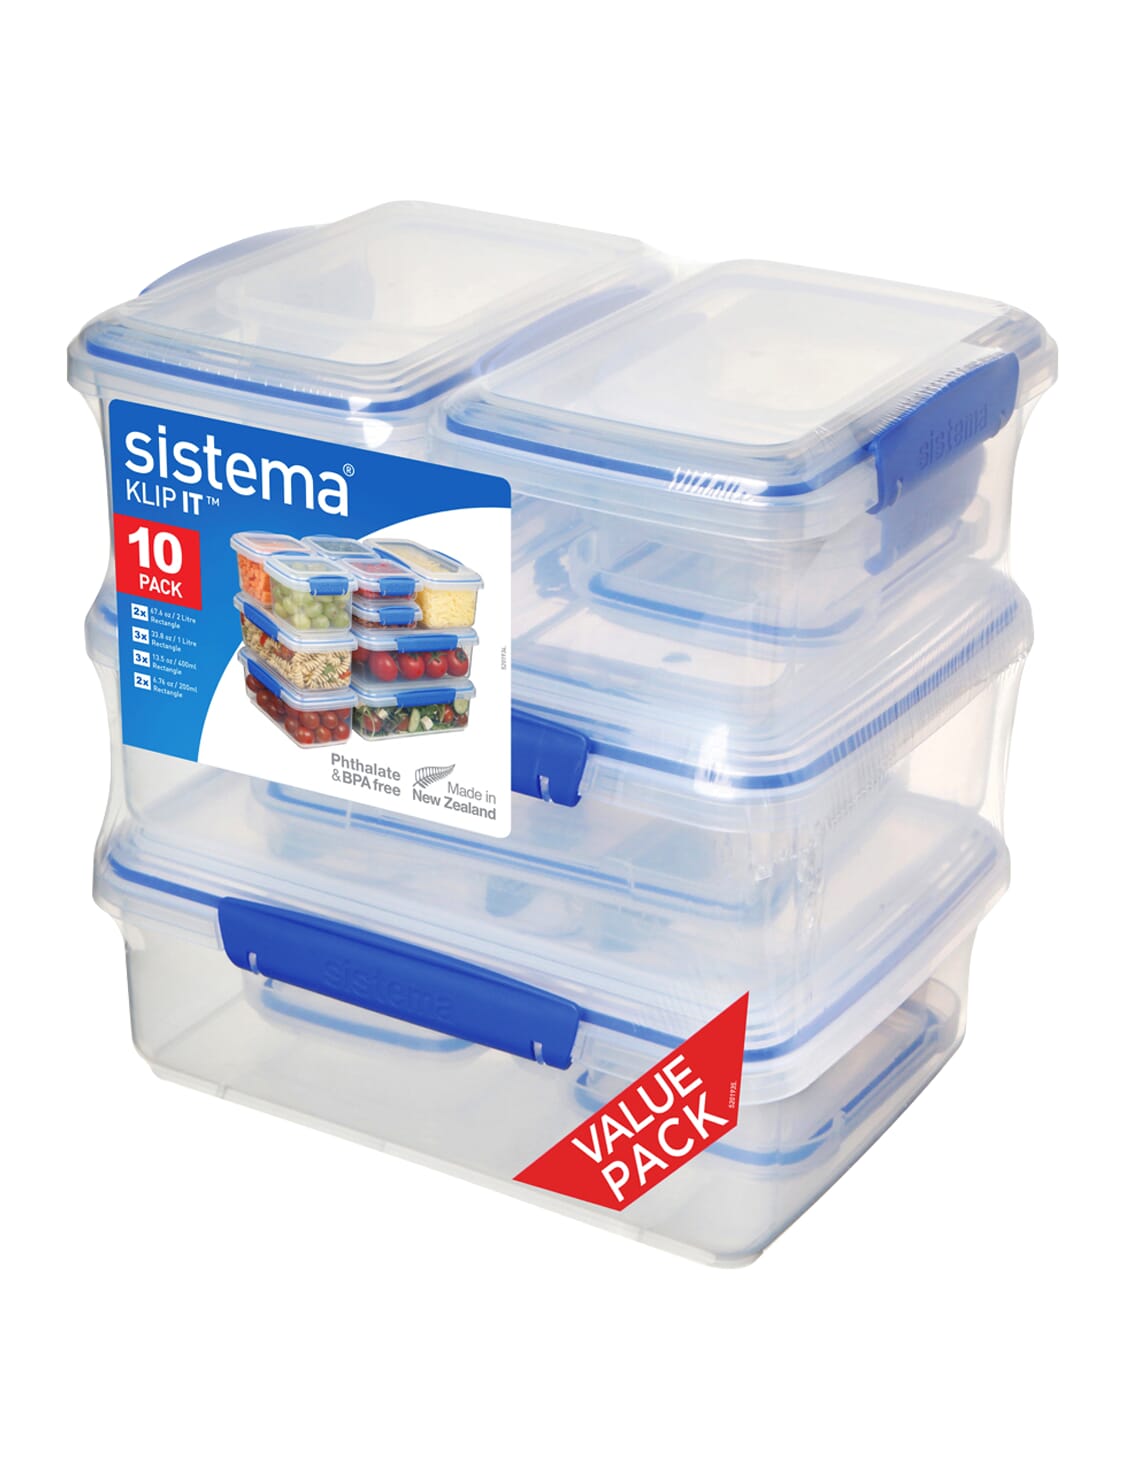 Blue Clips Pack of 8 Sistema KLIP IT Container 